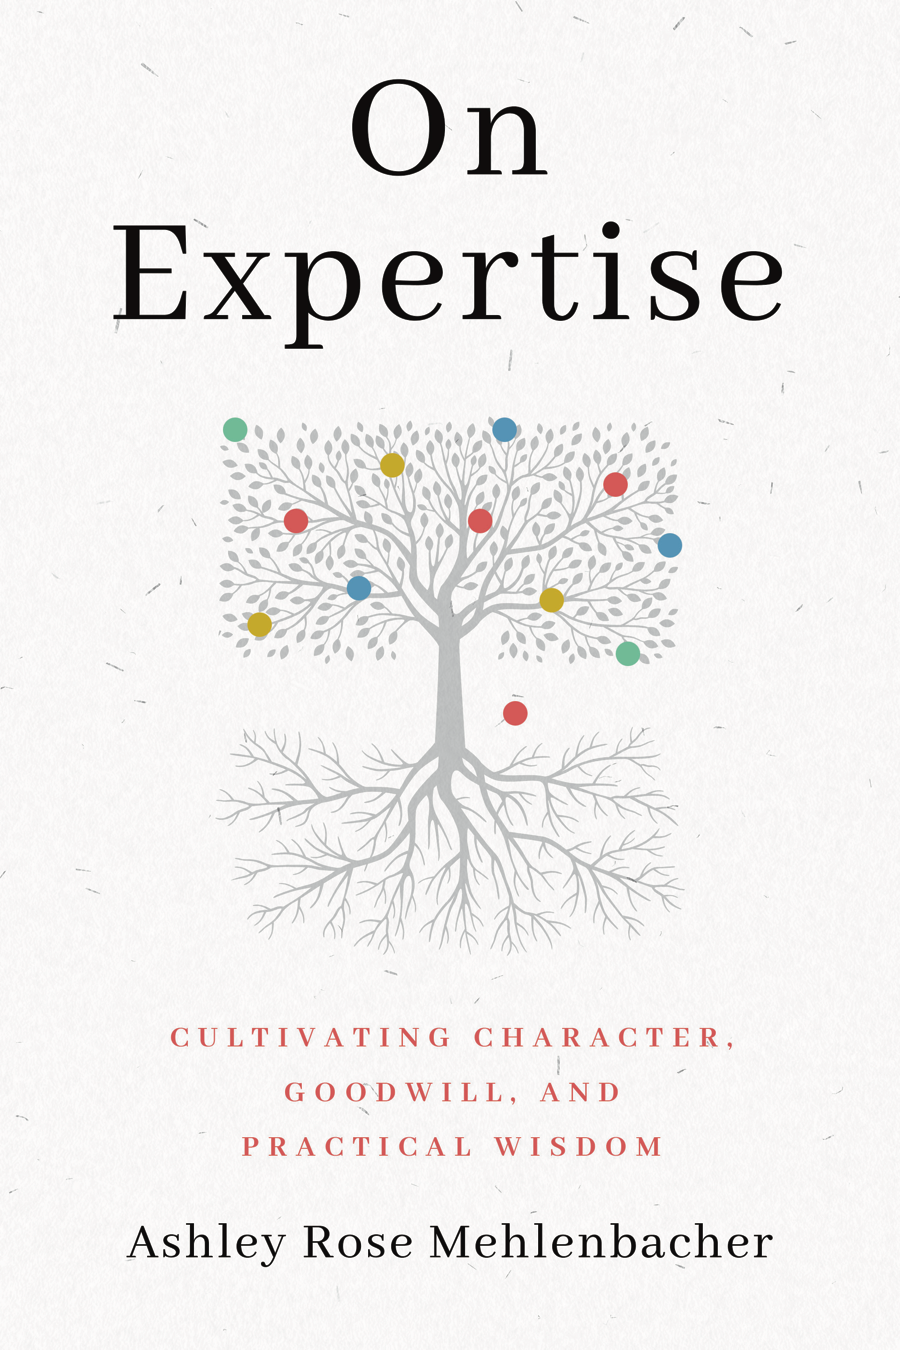 Cover of On Expertise. Shows a tree and the book title.